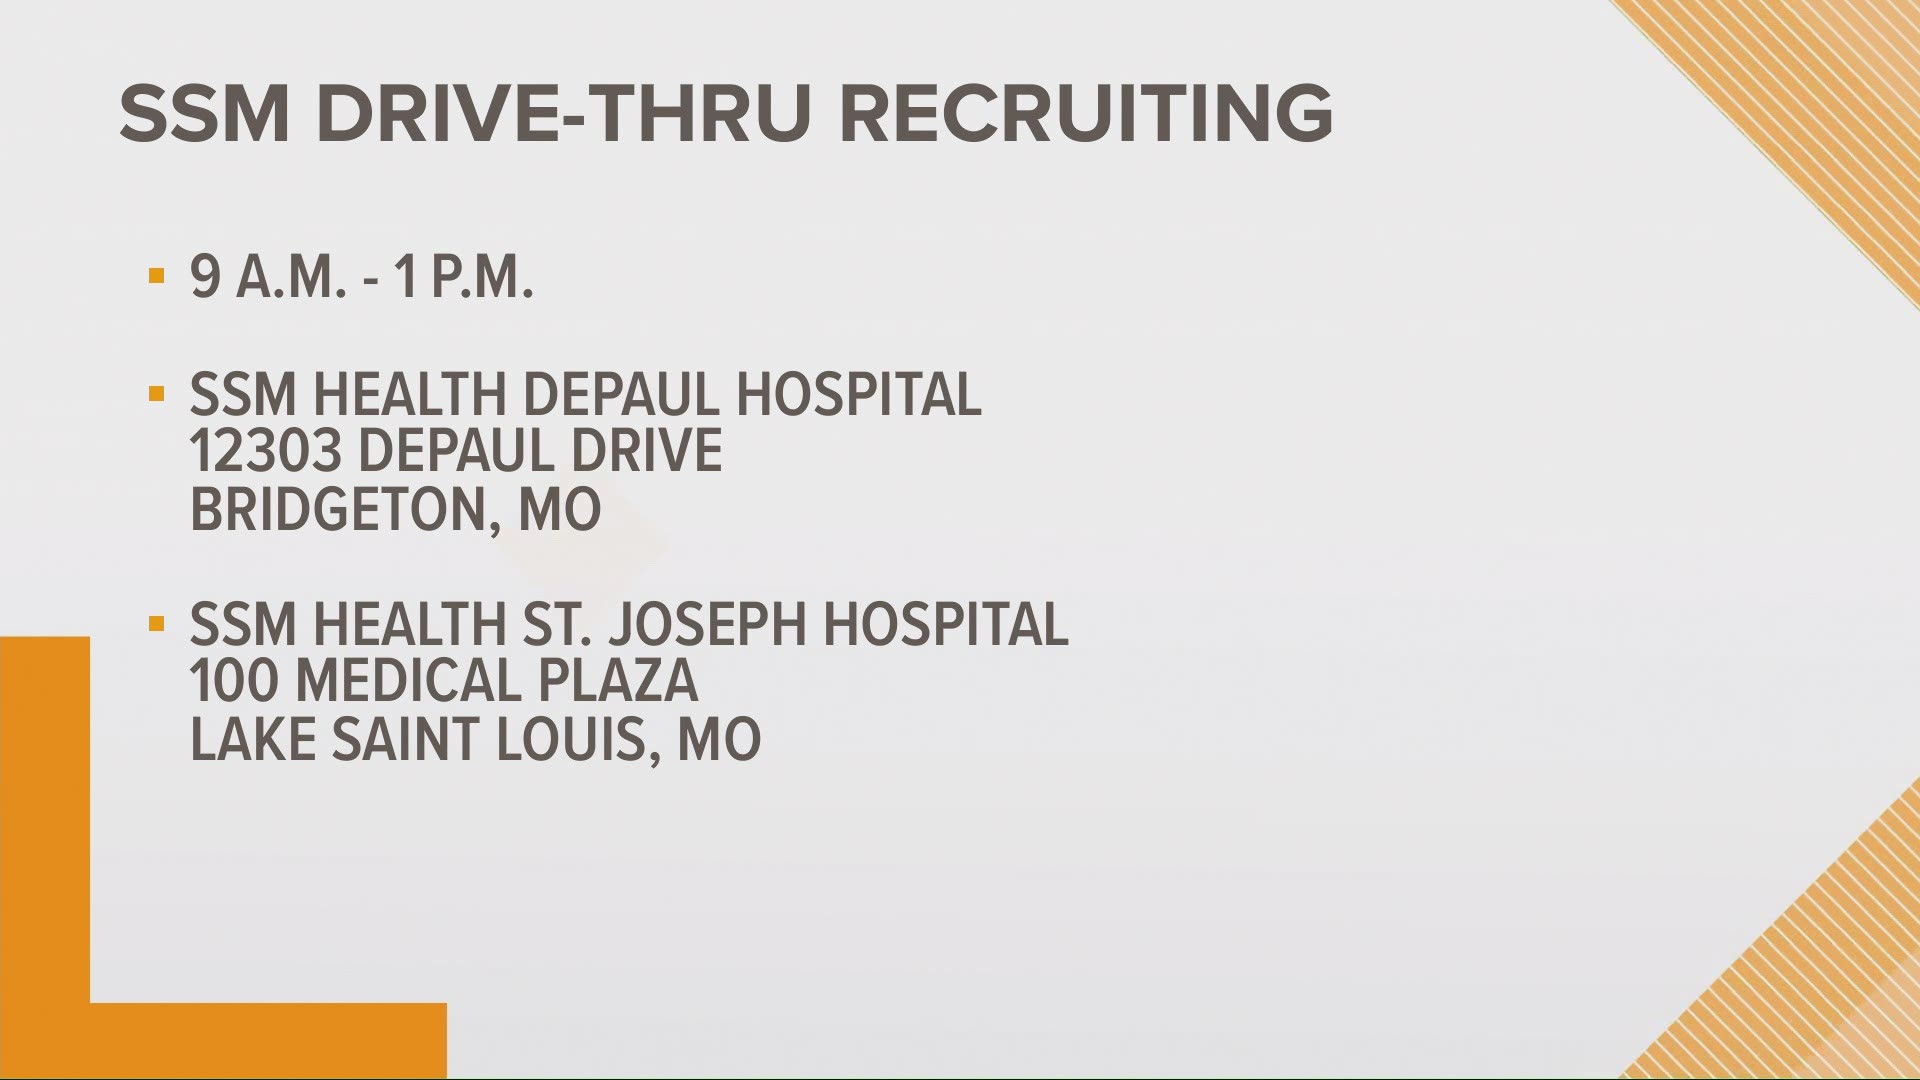 SSM Health is looking to interview candidates for several open positions at its hospitals in Bridgeton and Lake St. Louis.